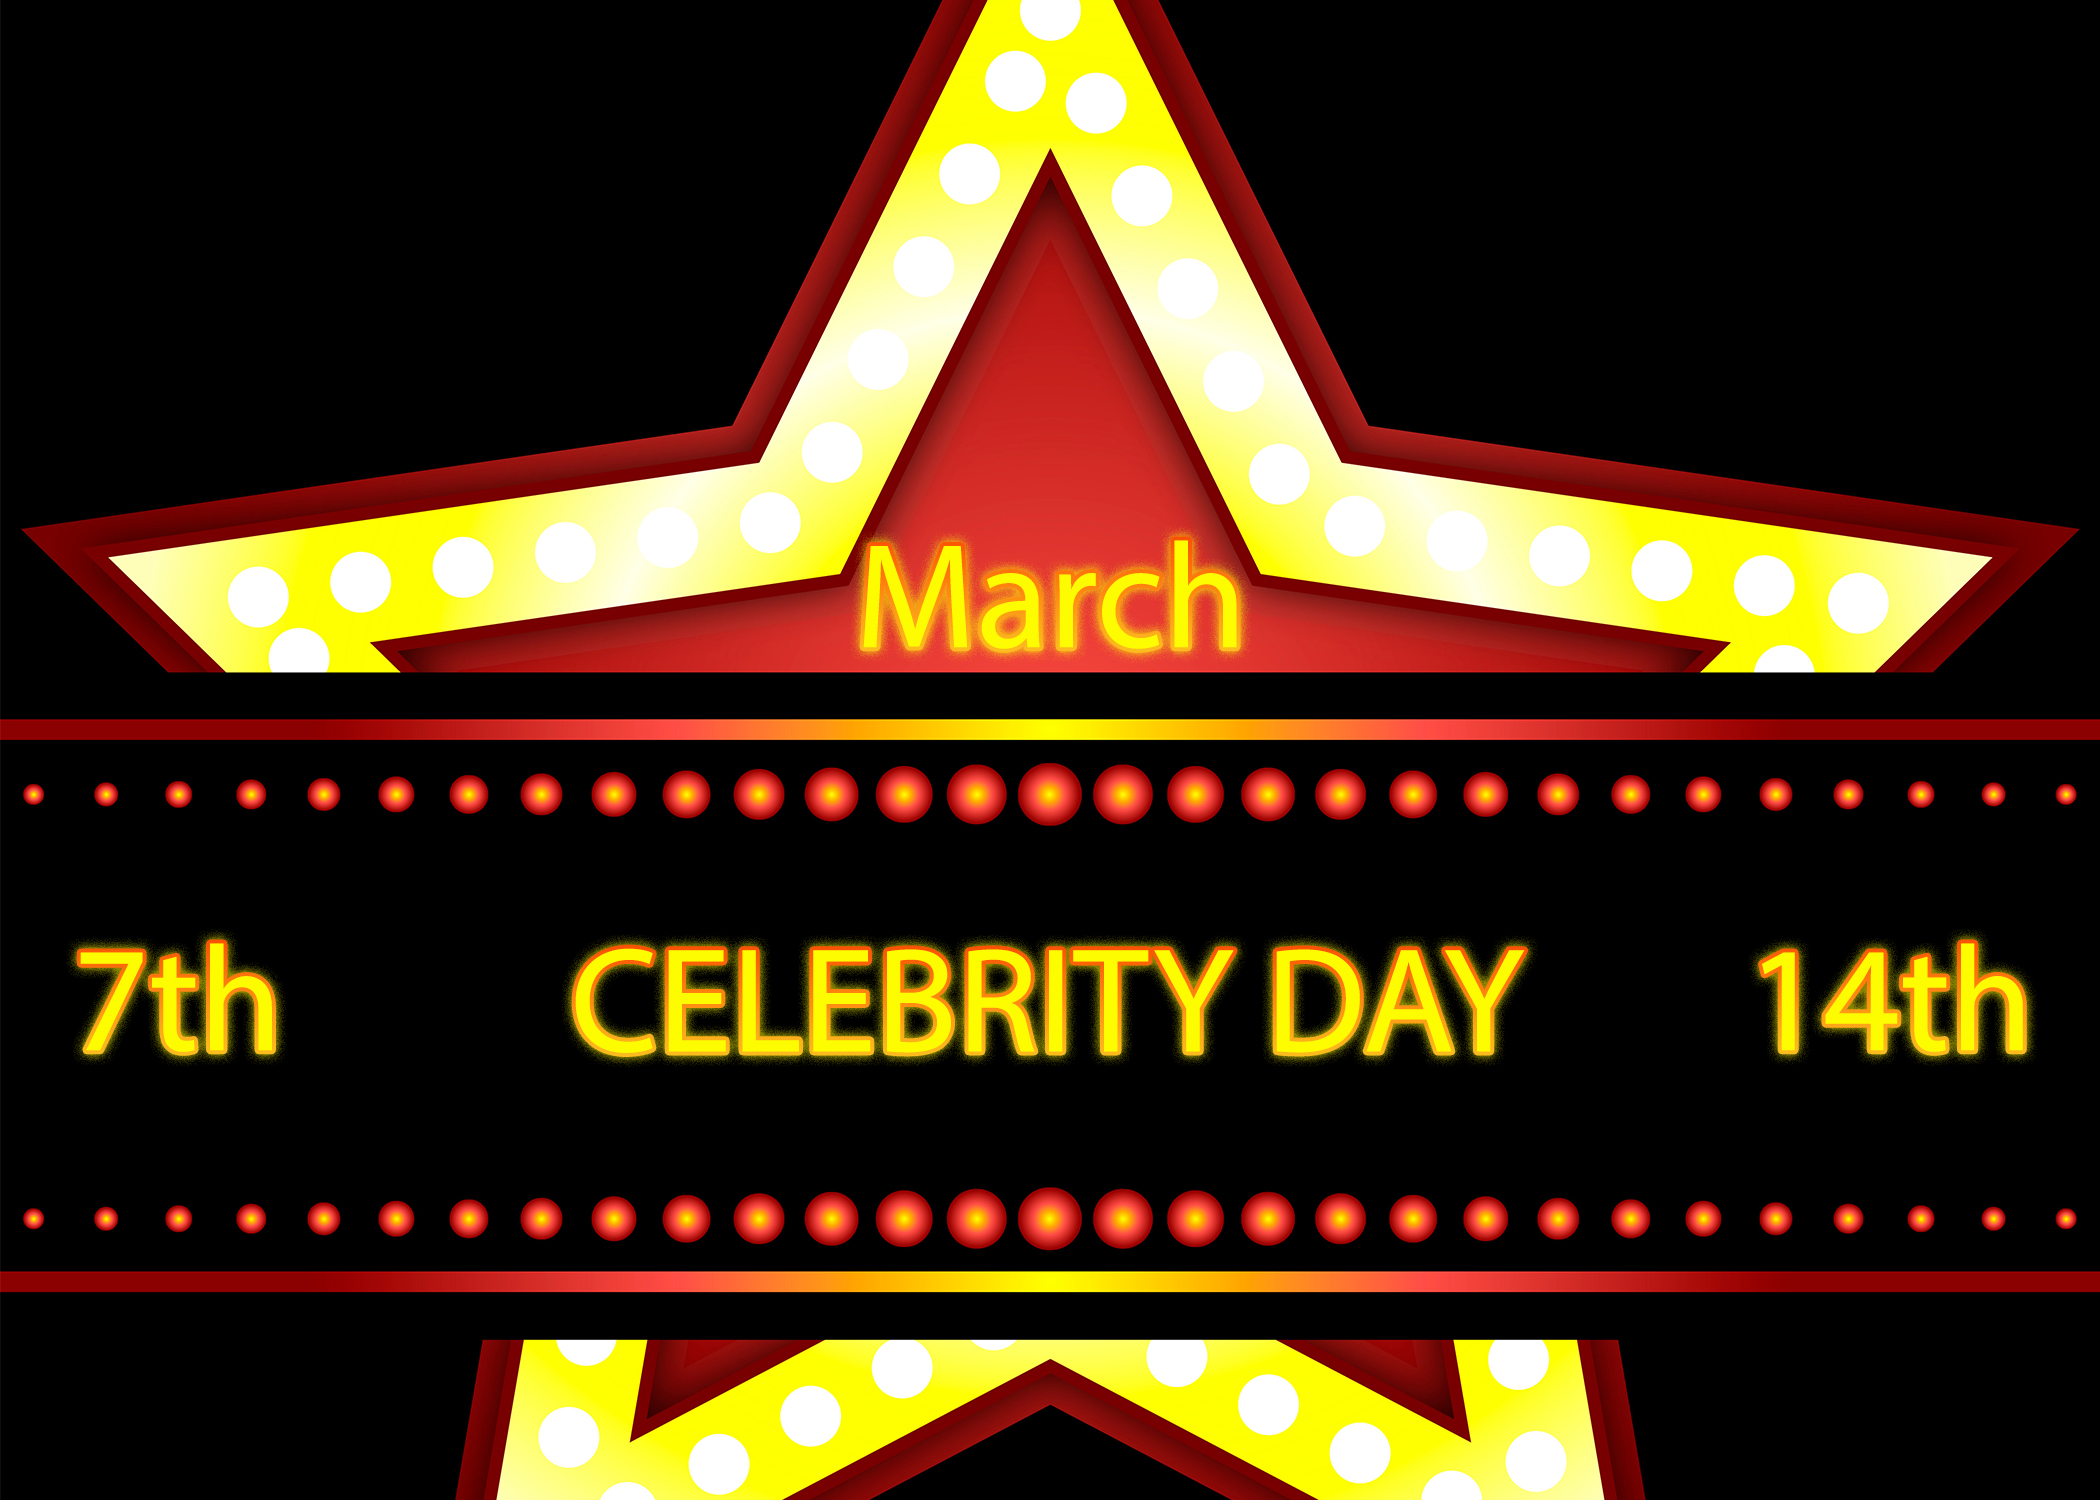 movie star themed image saying celebrity day